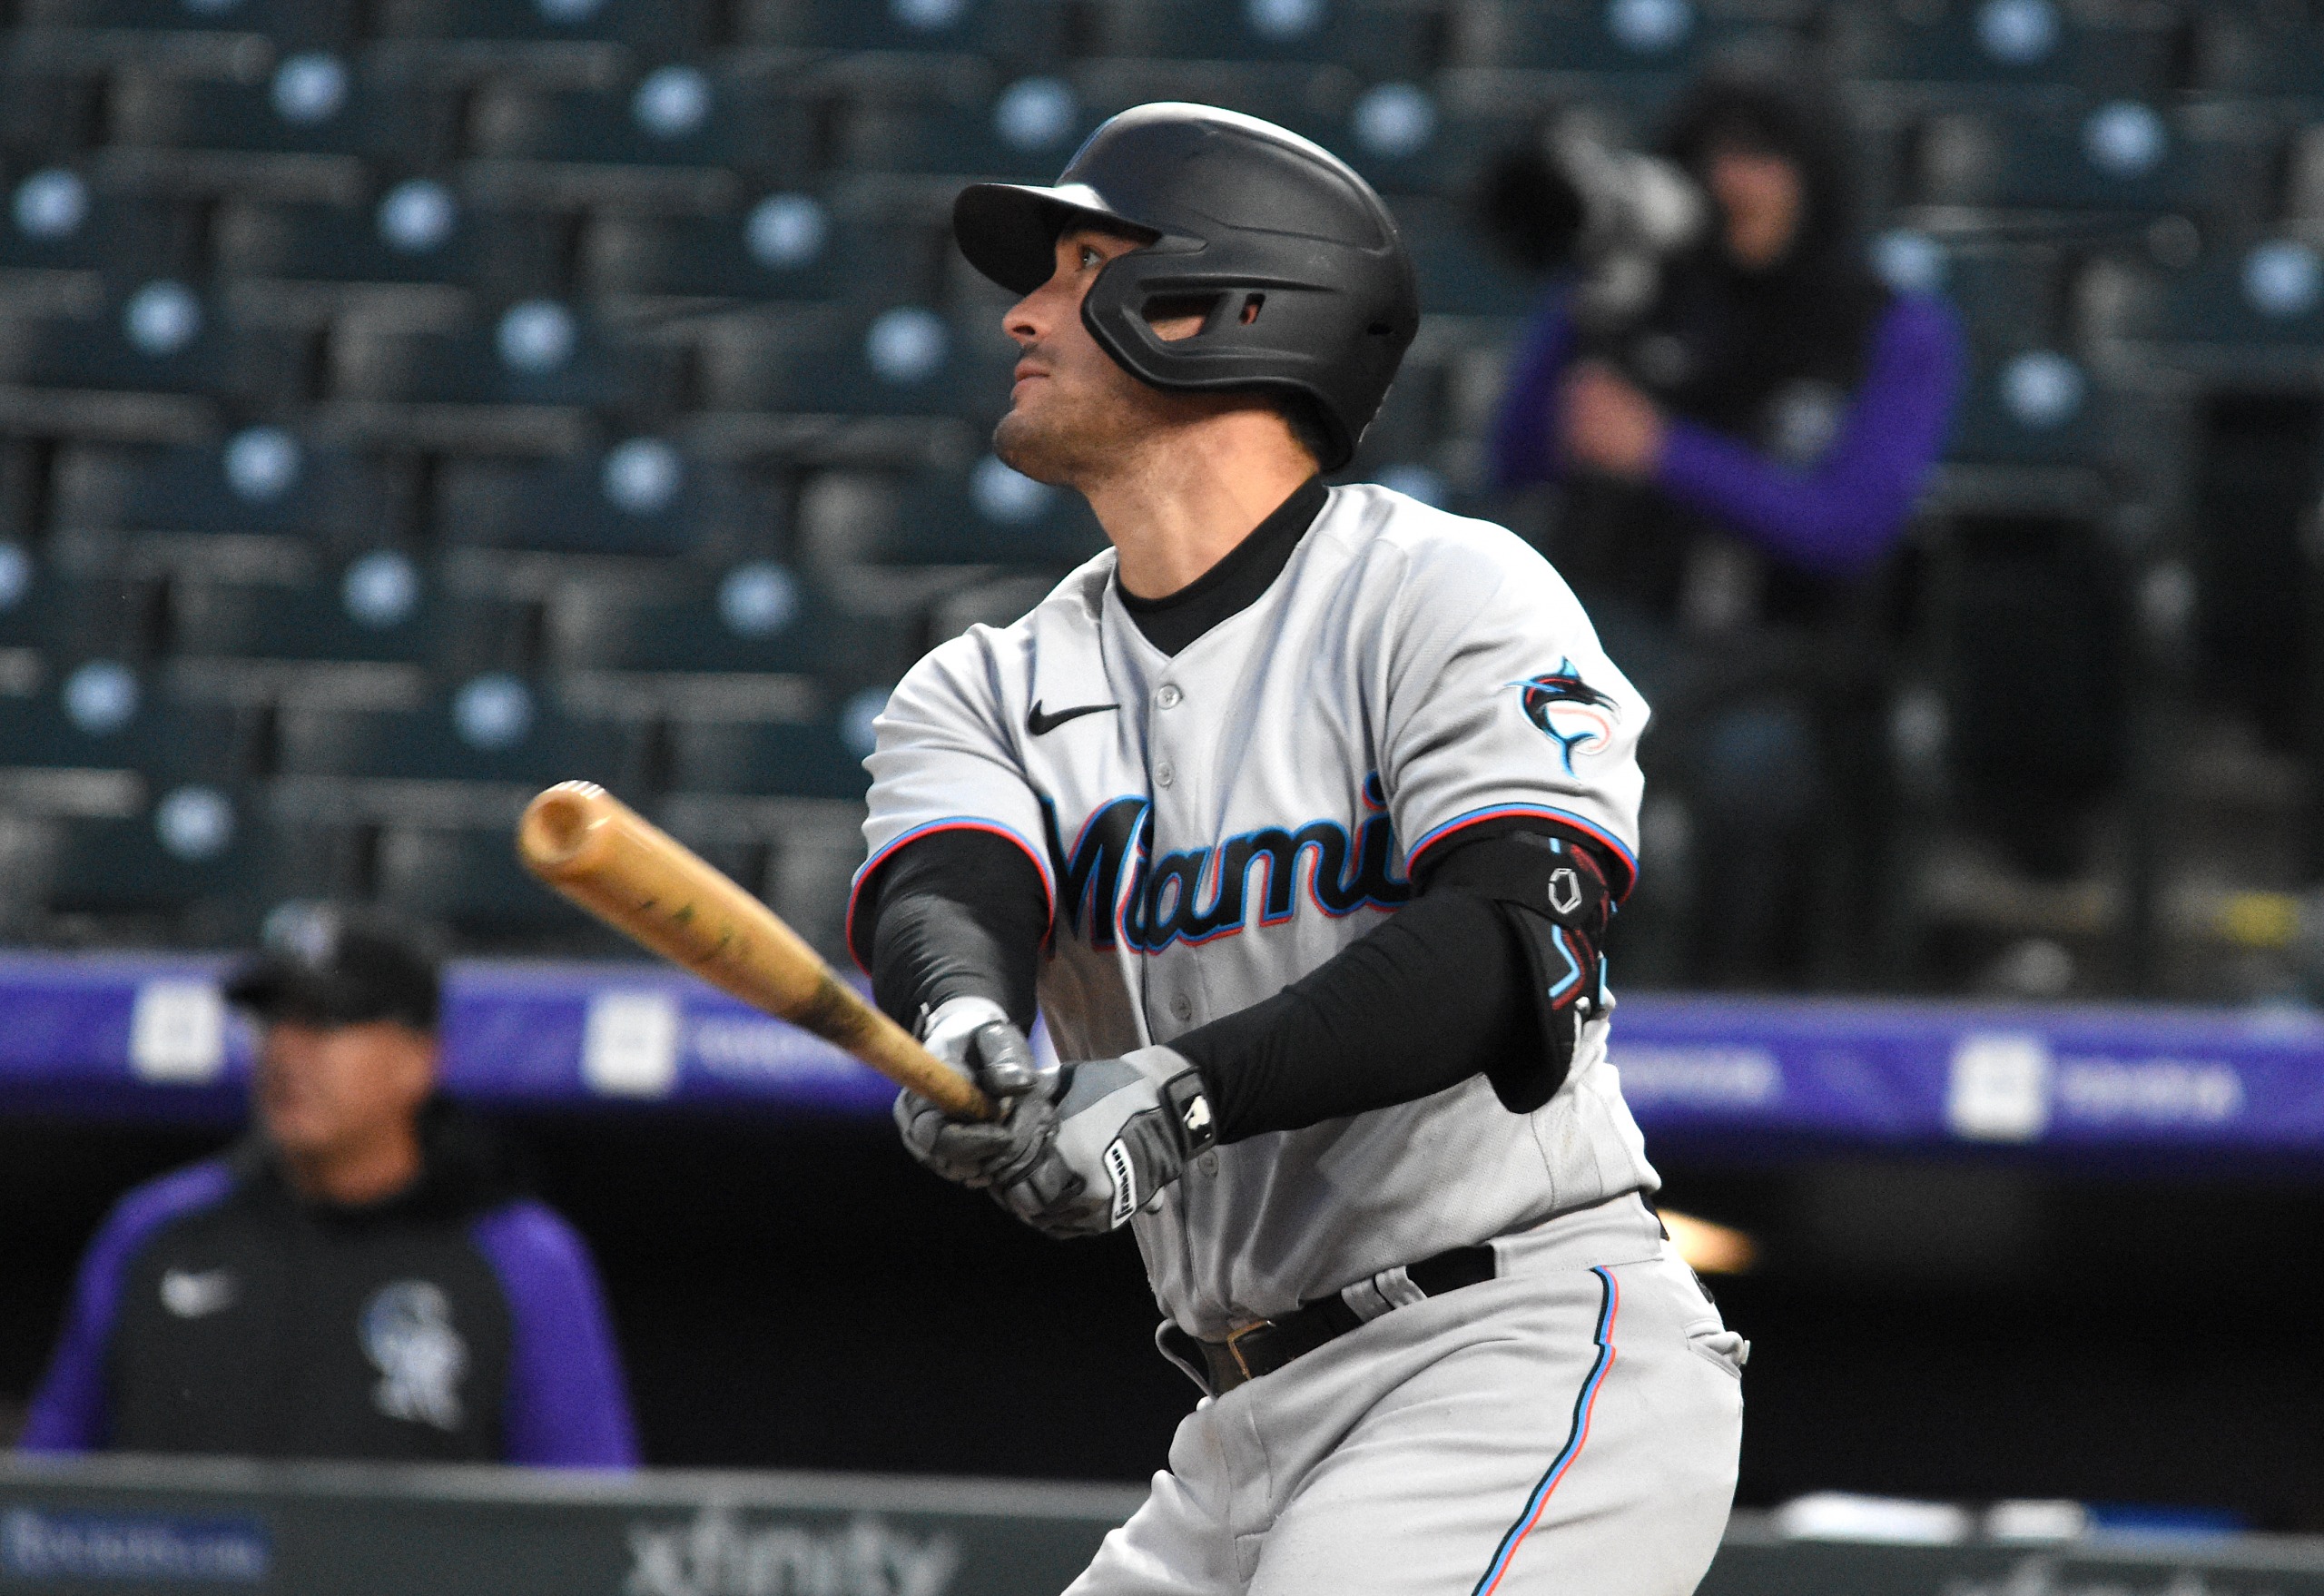 Peter Alonso gives Mets fans glimmer of hope - Minor League Ball